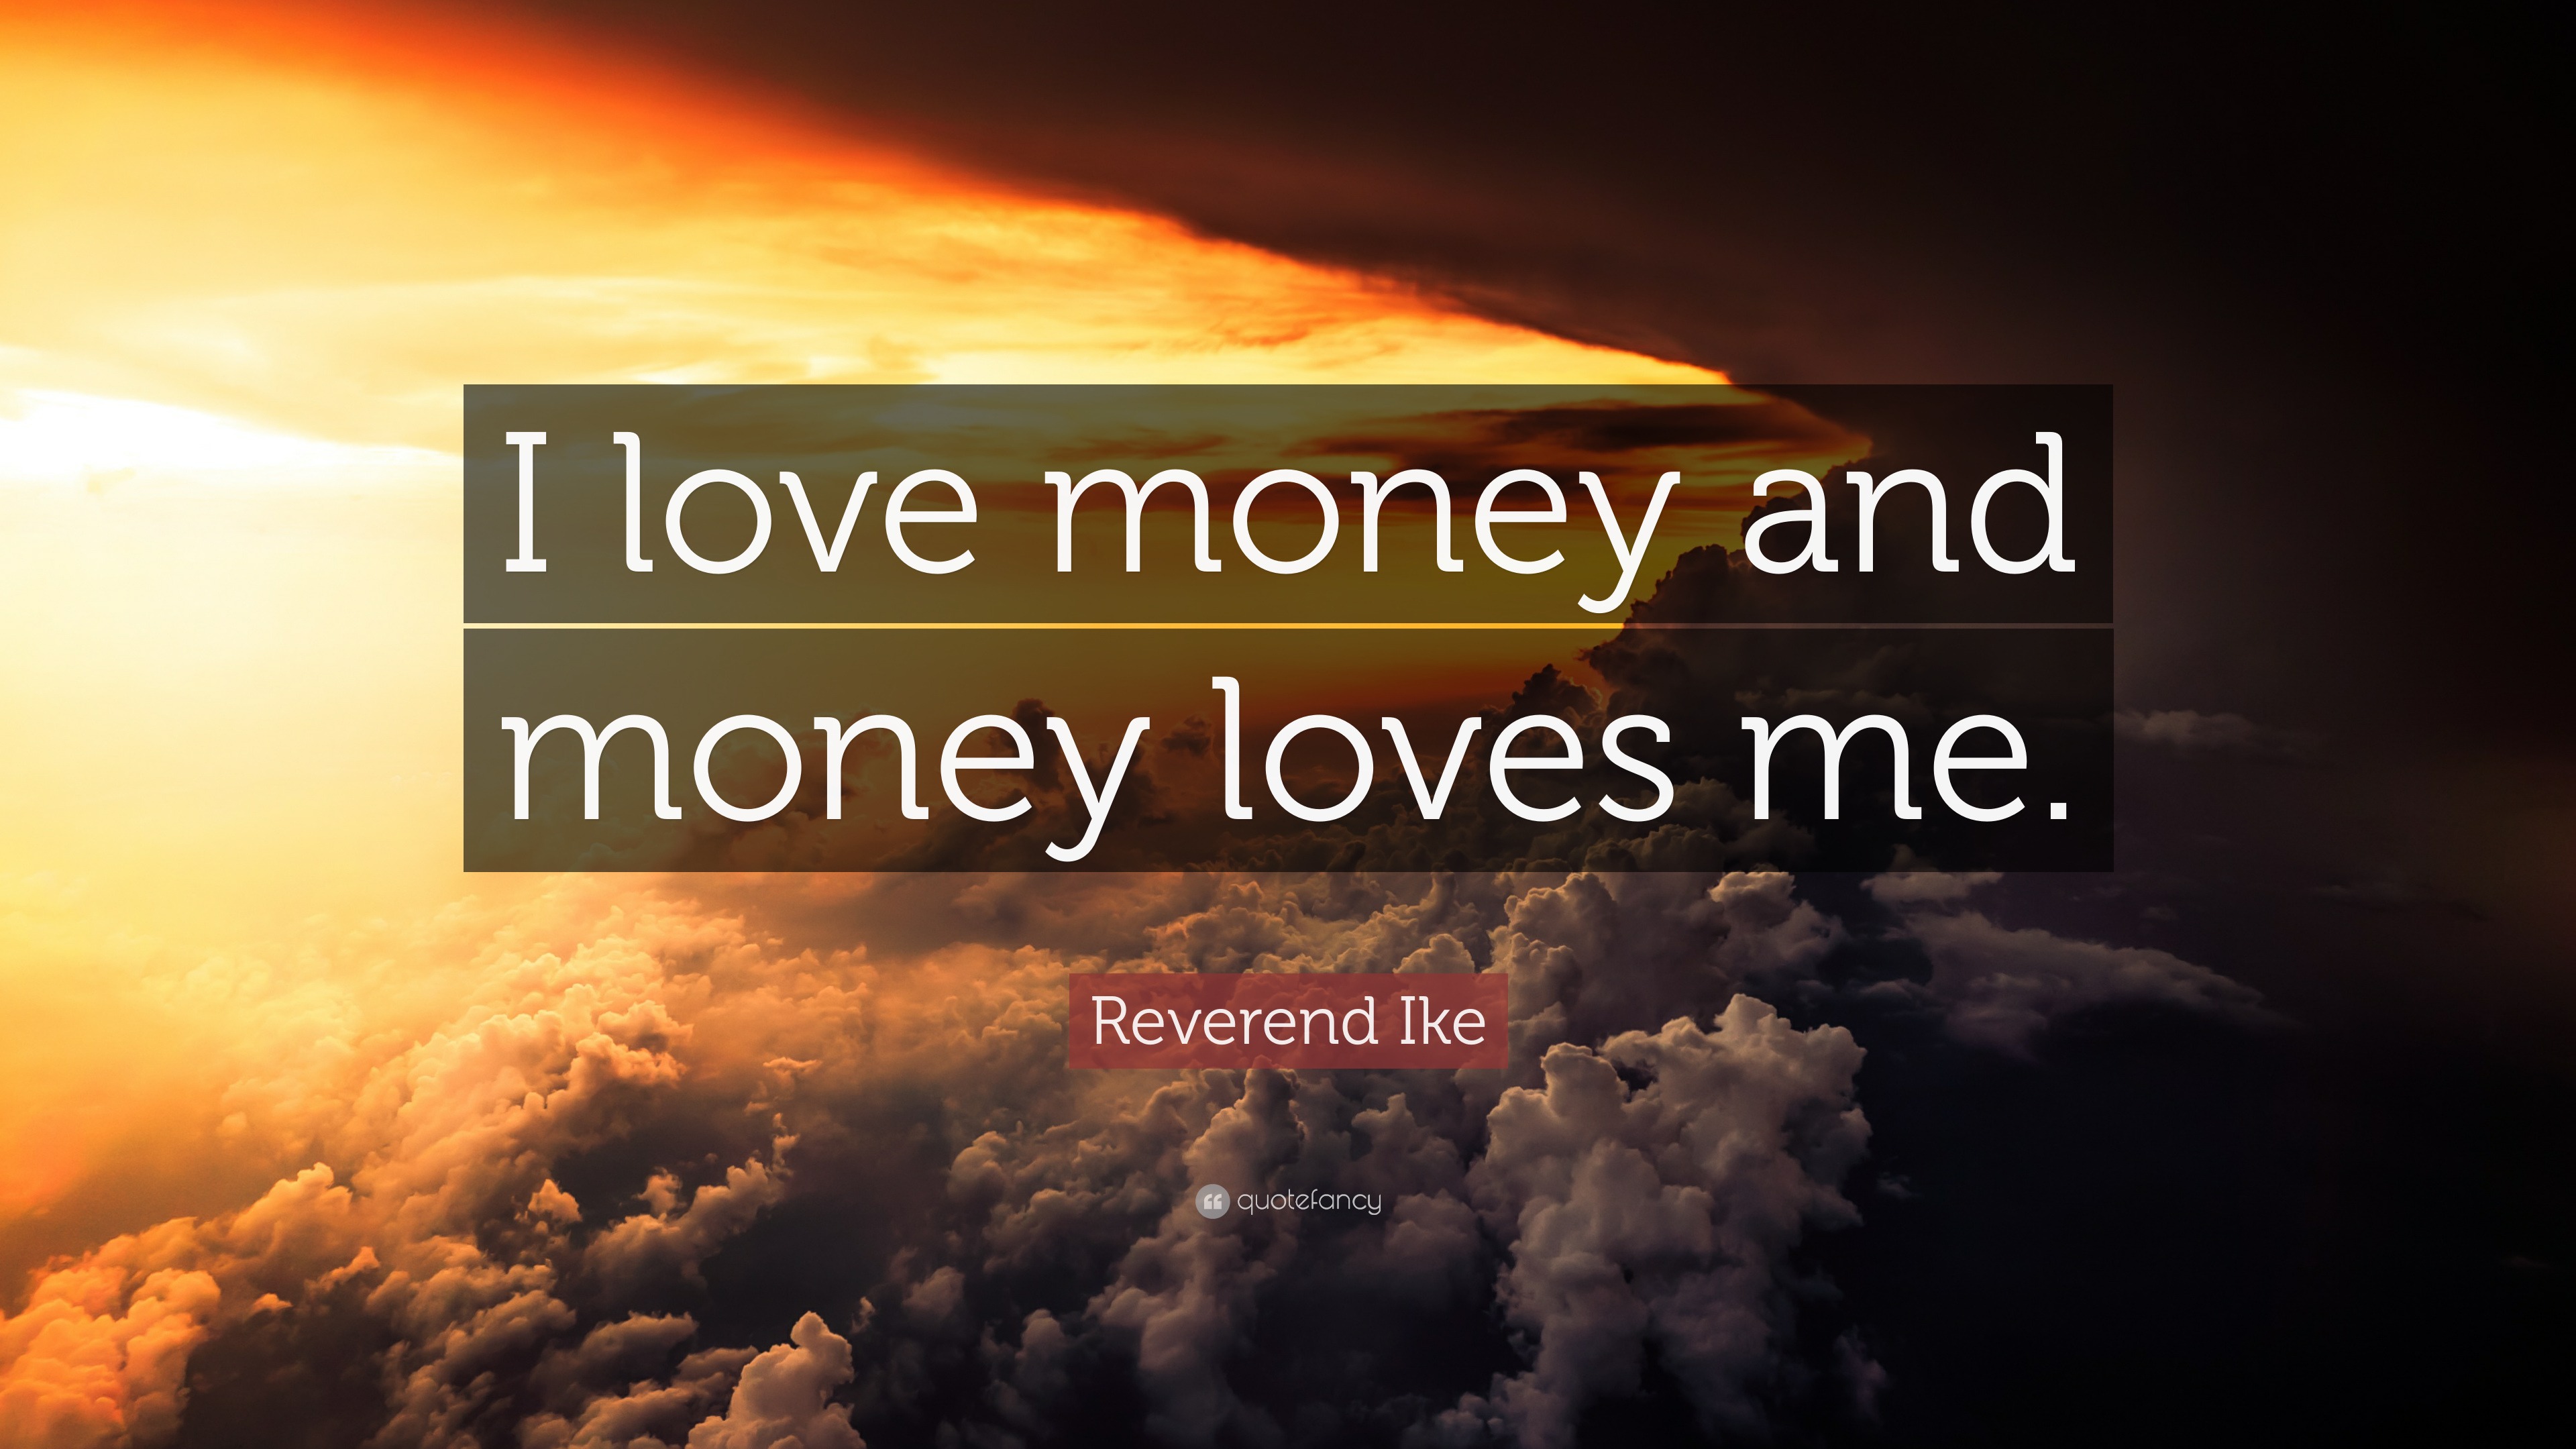 Reverend Ike Quote: "I love money and money loves me." (12 wallpapers) - Quotefancy